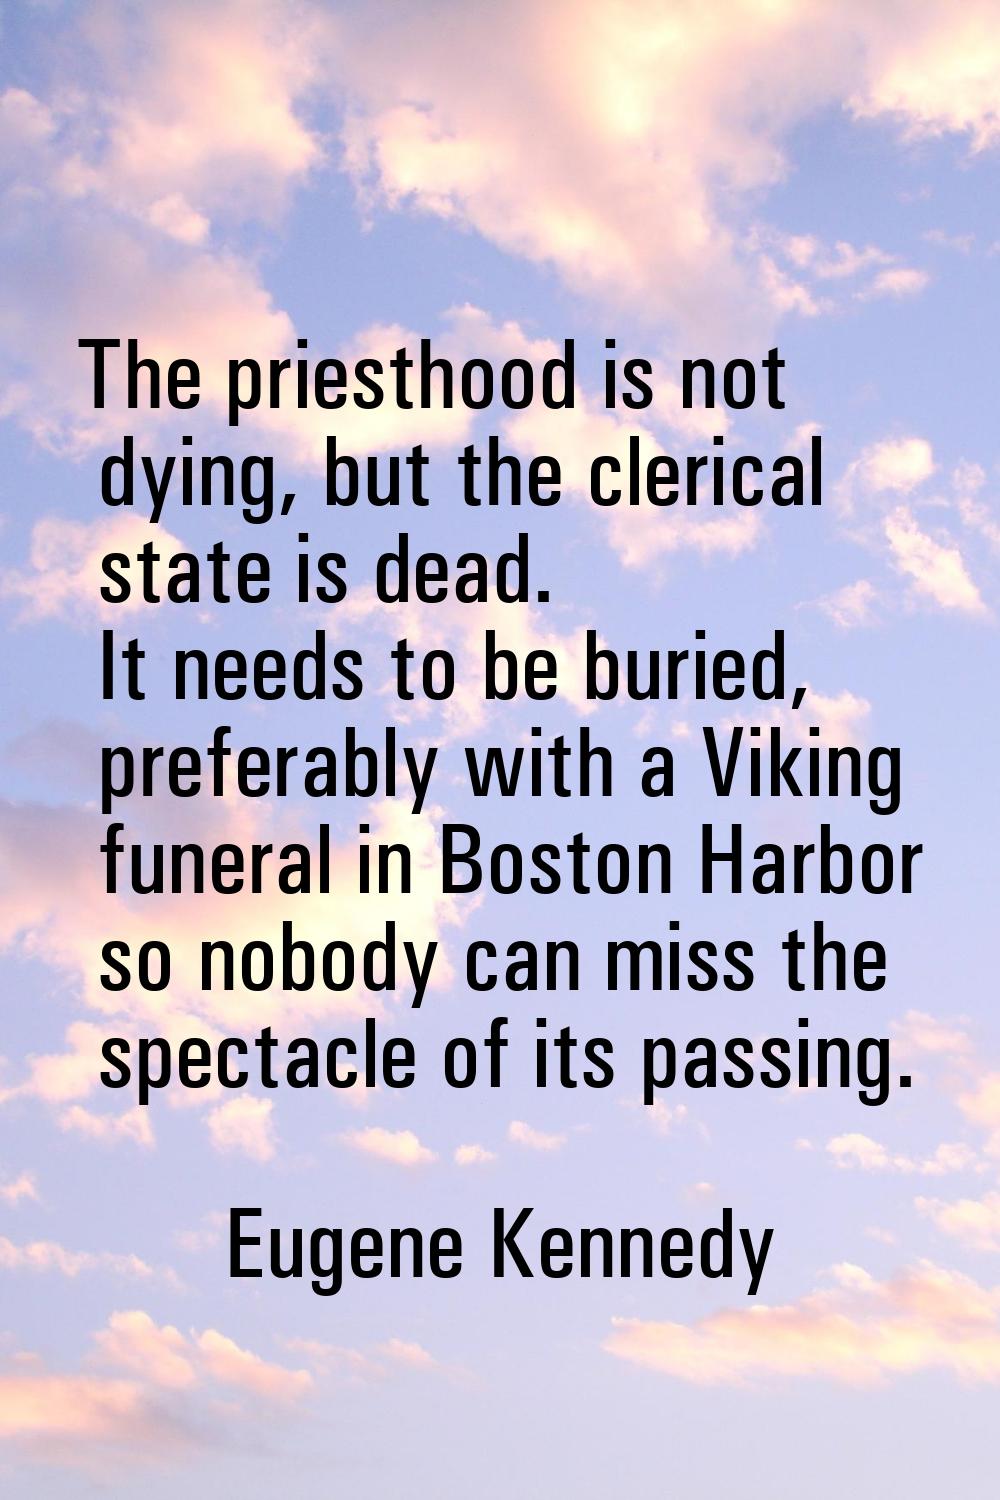 The priesthood is not dying, but the clerical state is dead. It needs to be buried, preferably with